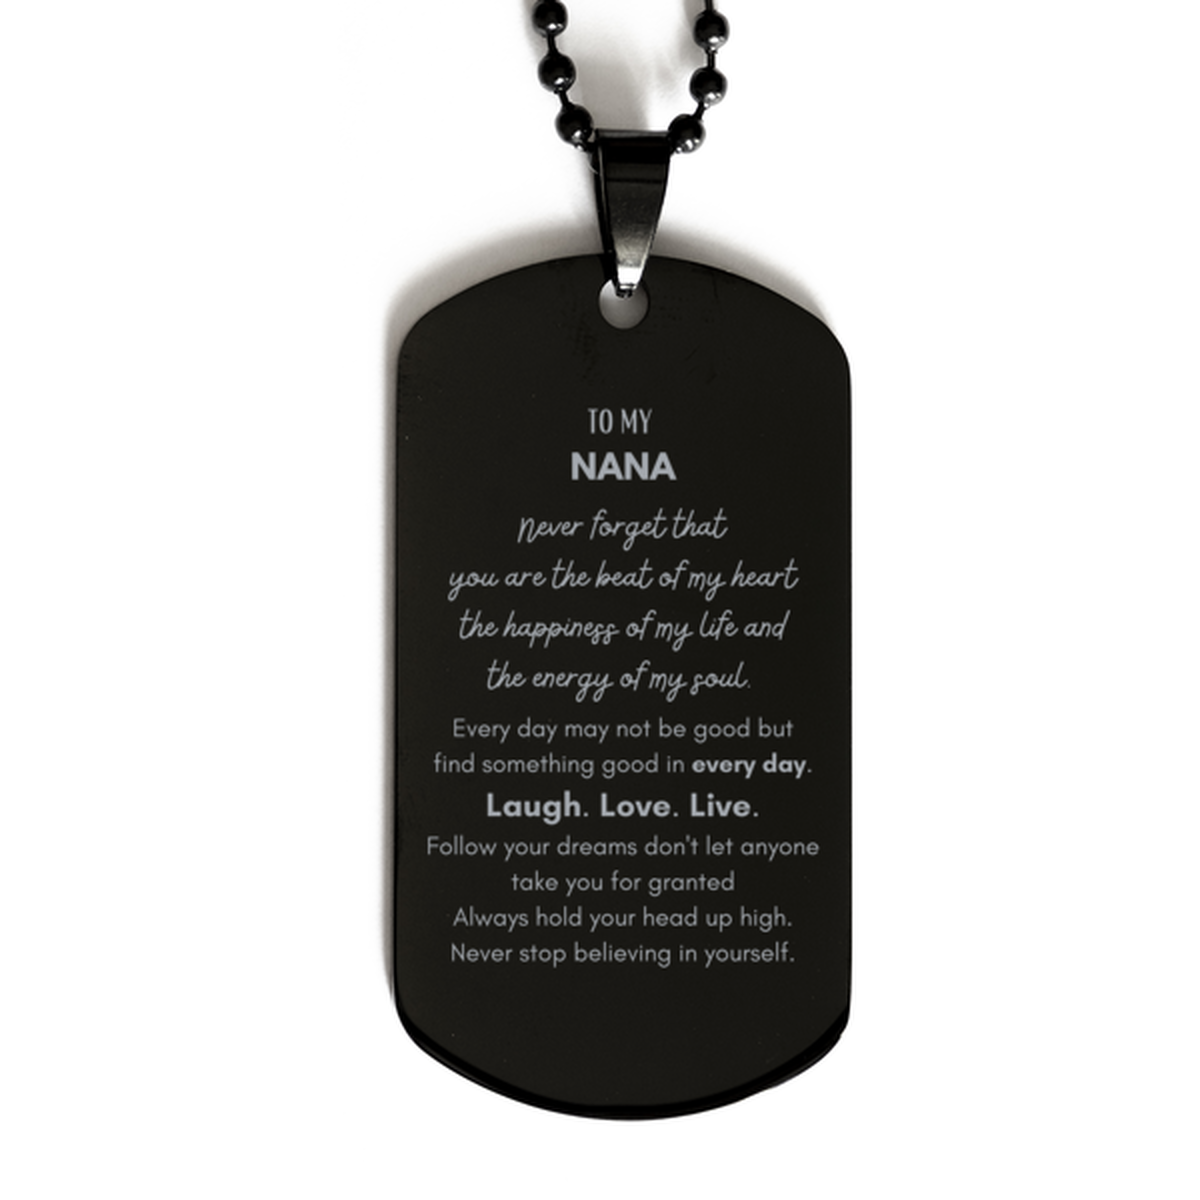 To My Nana Dogtag Gifts, Christmas Nana Black Dog Tag Present, Birthday Unique Motivational For Nana, To My Nana Never forget that you are the beat of my heart the happiness of my life and the energy of my soul